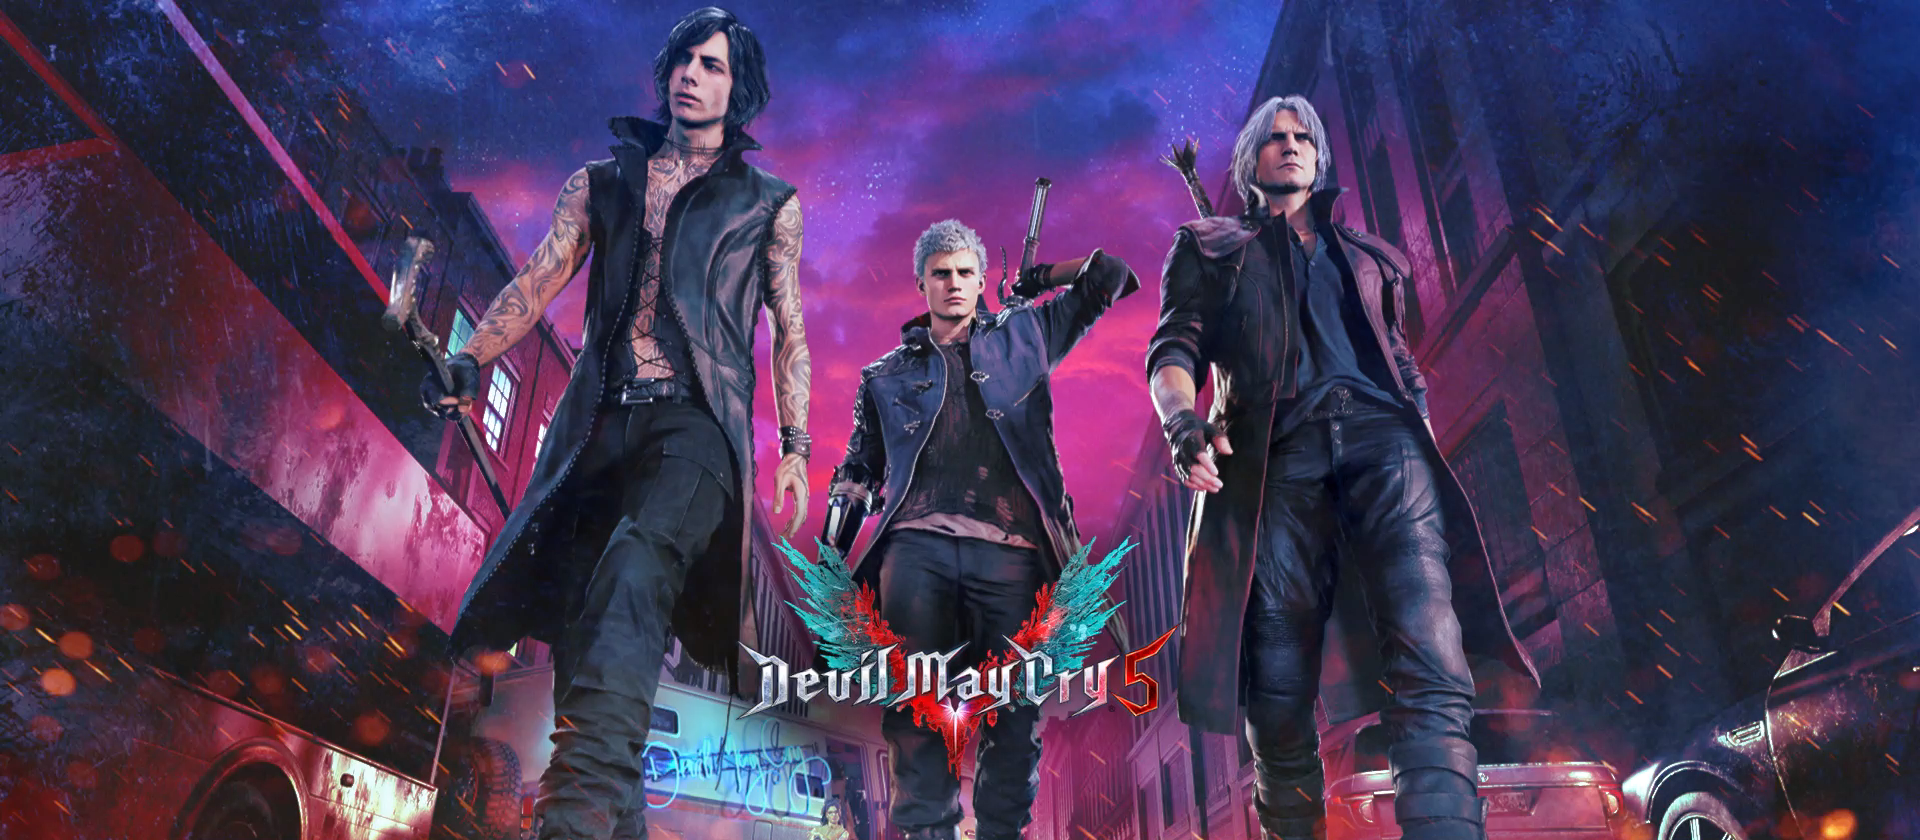 devil may cry 5 xbox one x